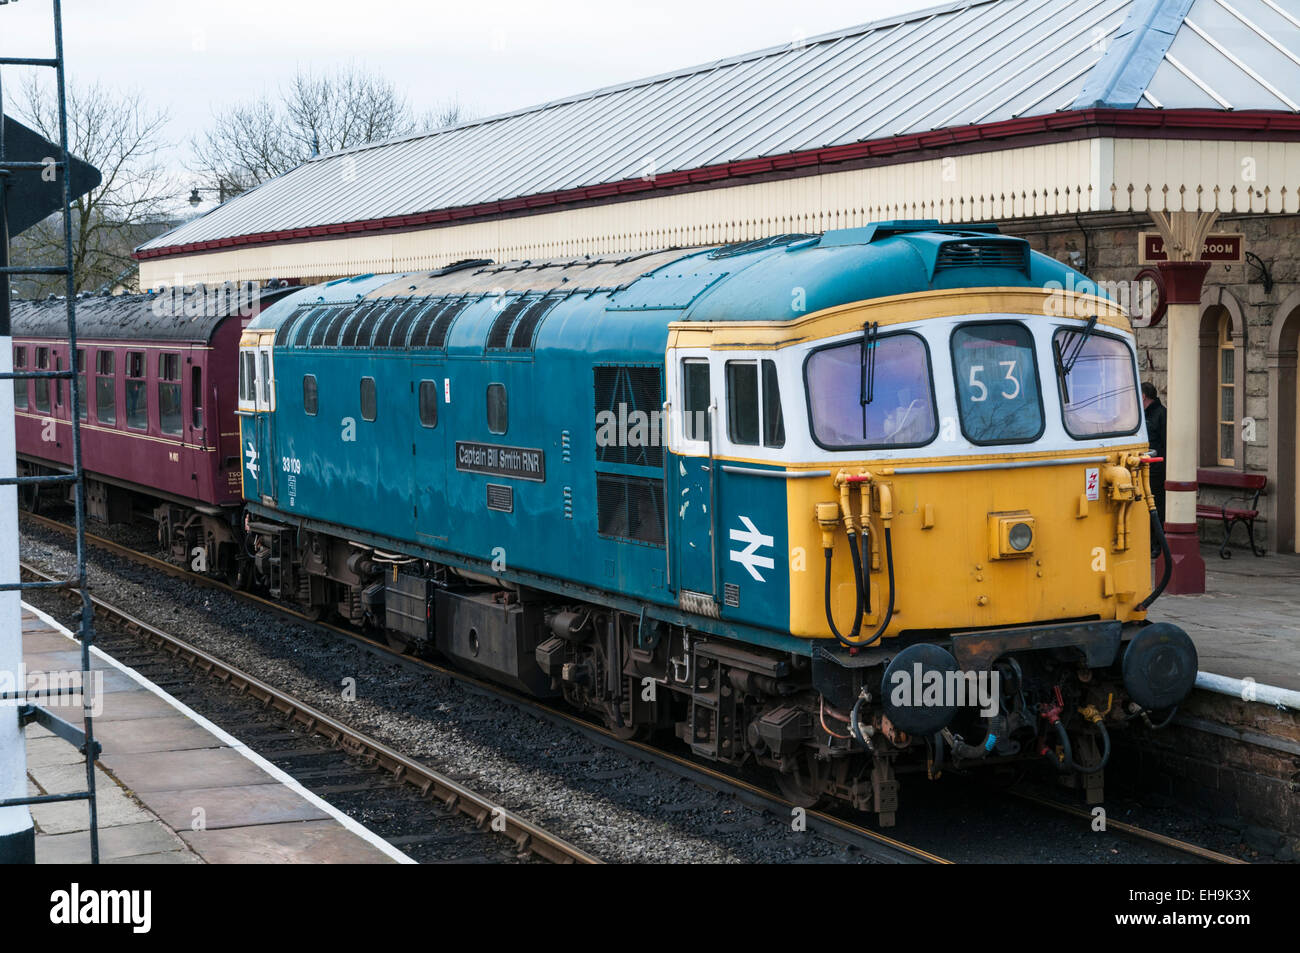 Class 33 diesel loco recreating a 1970s and 1980s passenger train scene at Ramsbottom station on the East Lancs Railway Stock Photo